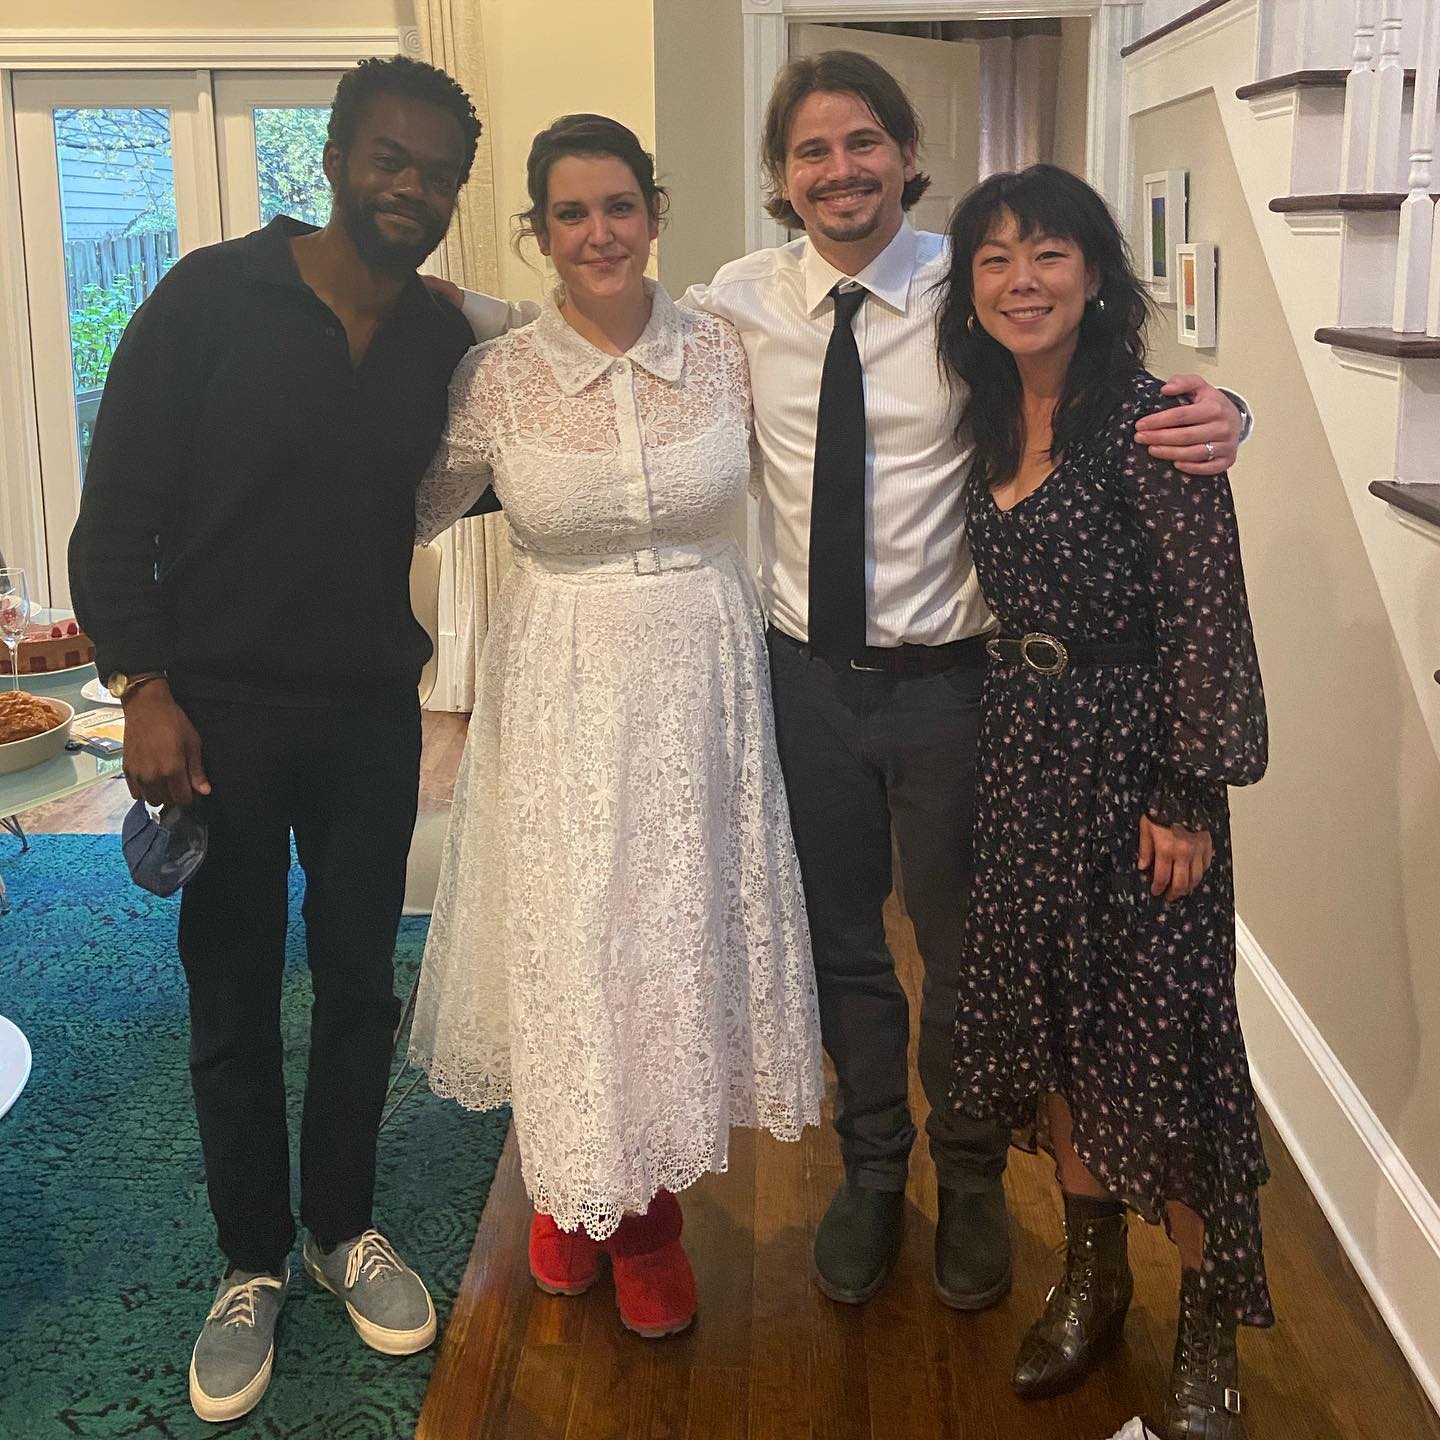 Melanie Lynskey with her husband, Jason Ritter, and their friends at their wedding ceremony